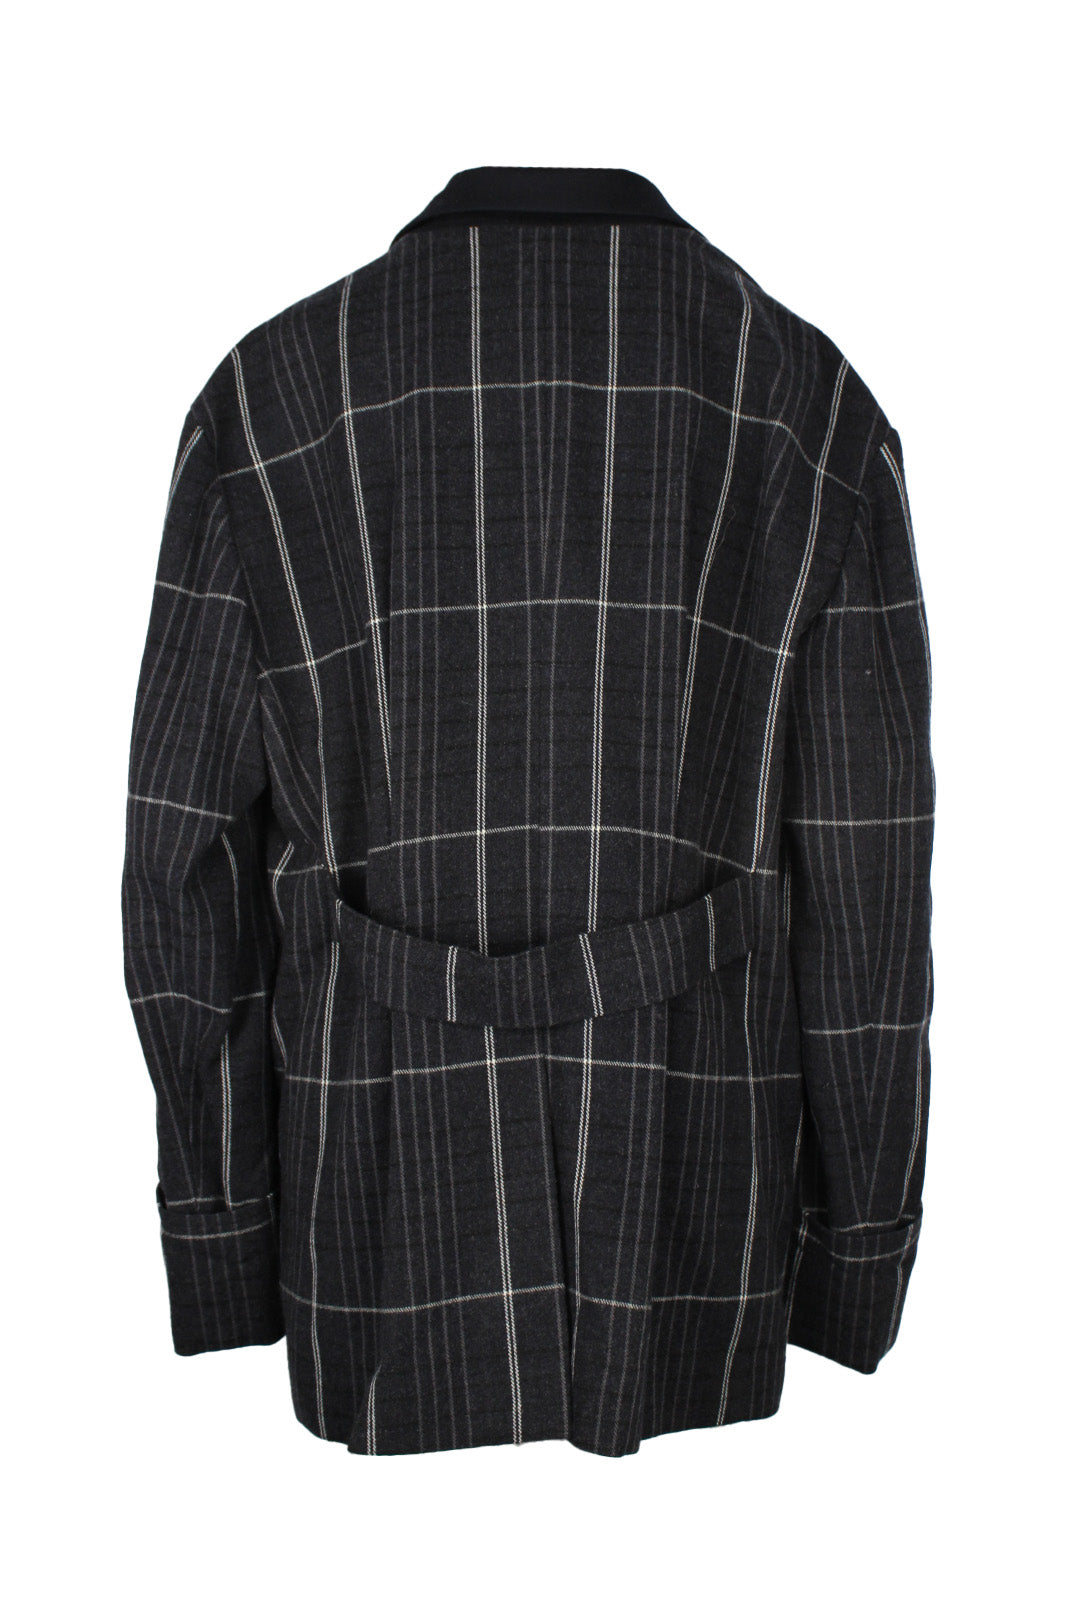 back of blazer with plaid pattern. 